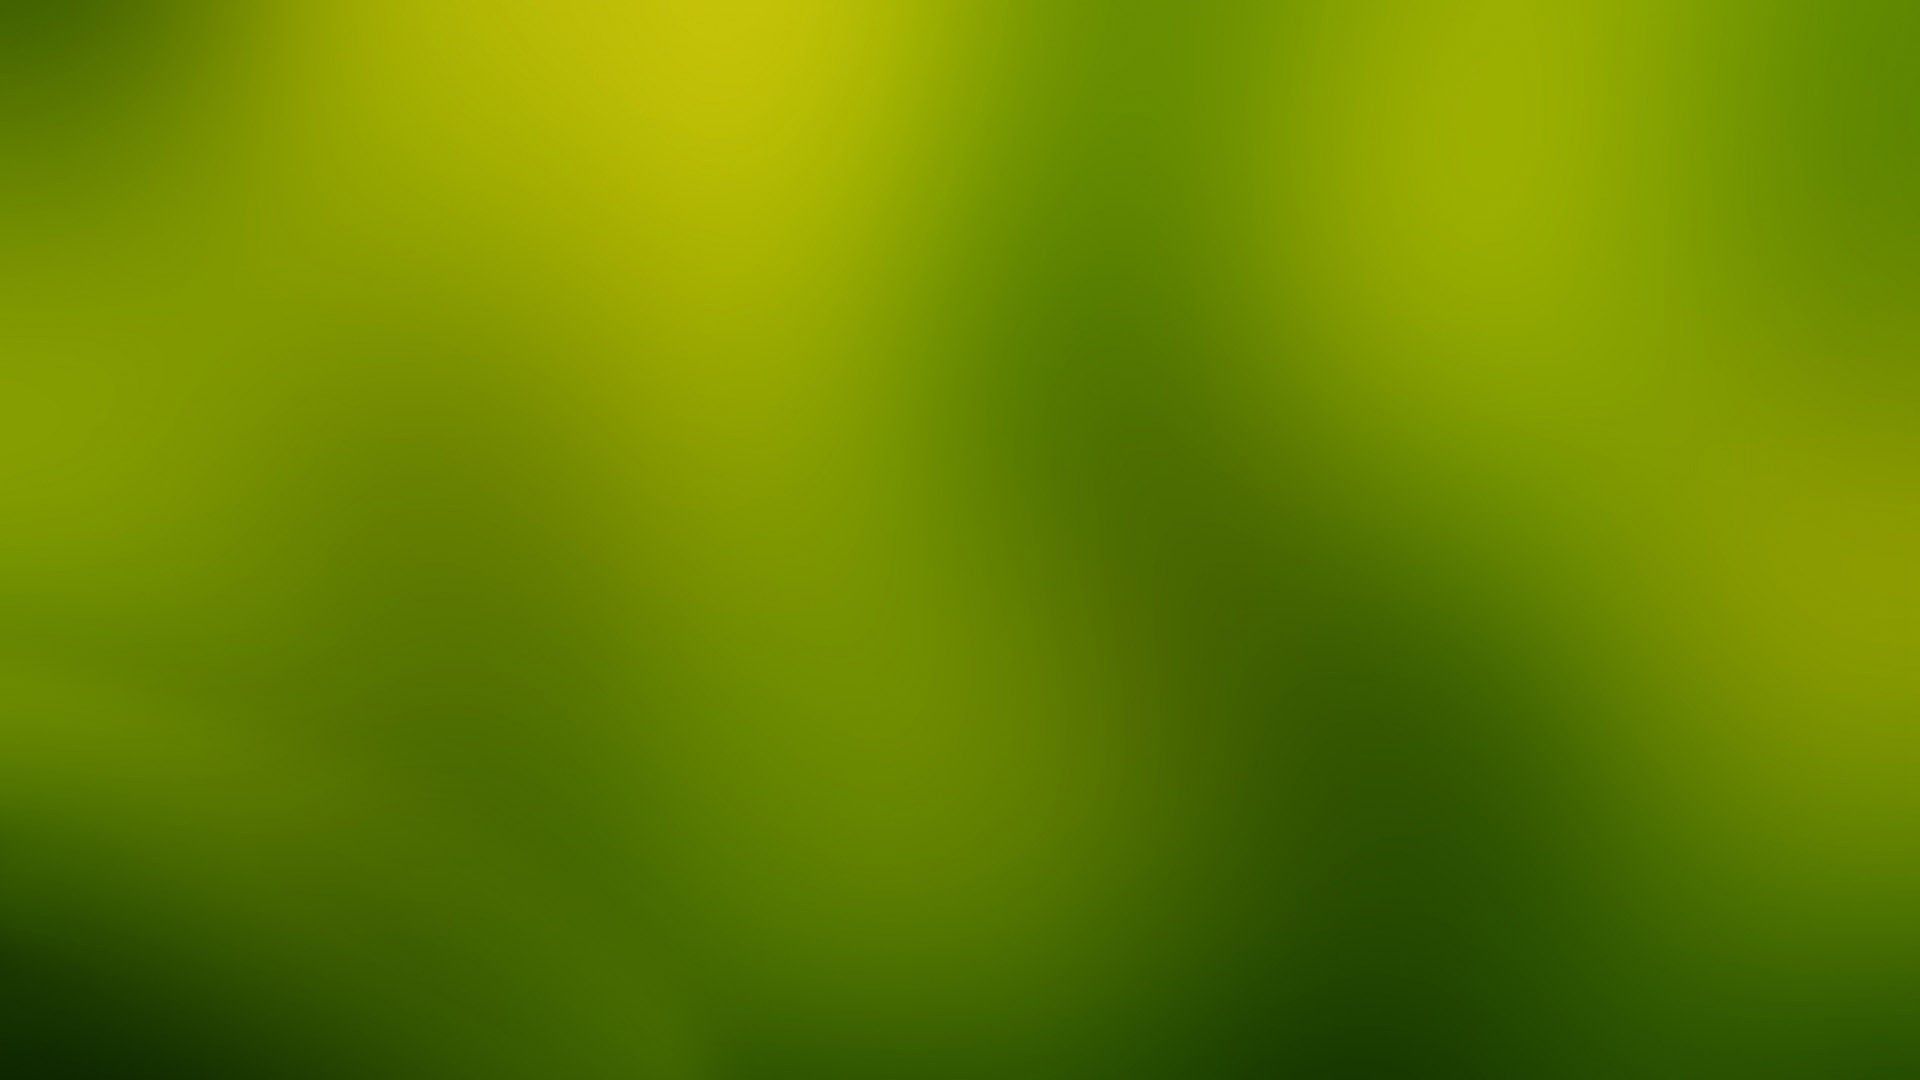  Blur  HD  Wallpapers  Group 73 